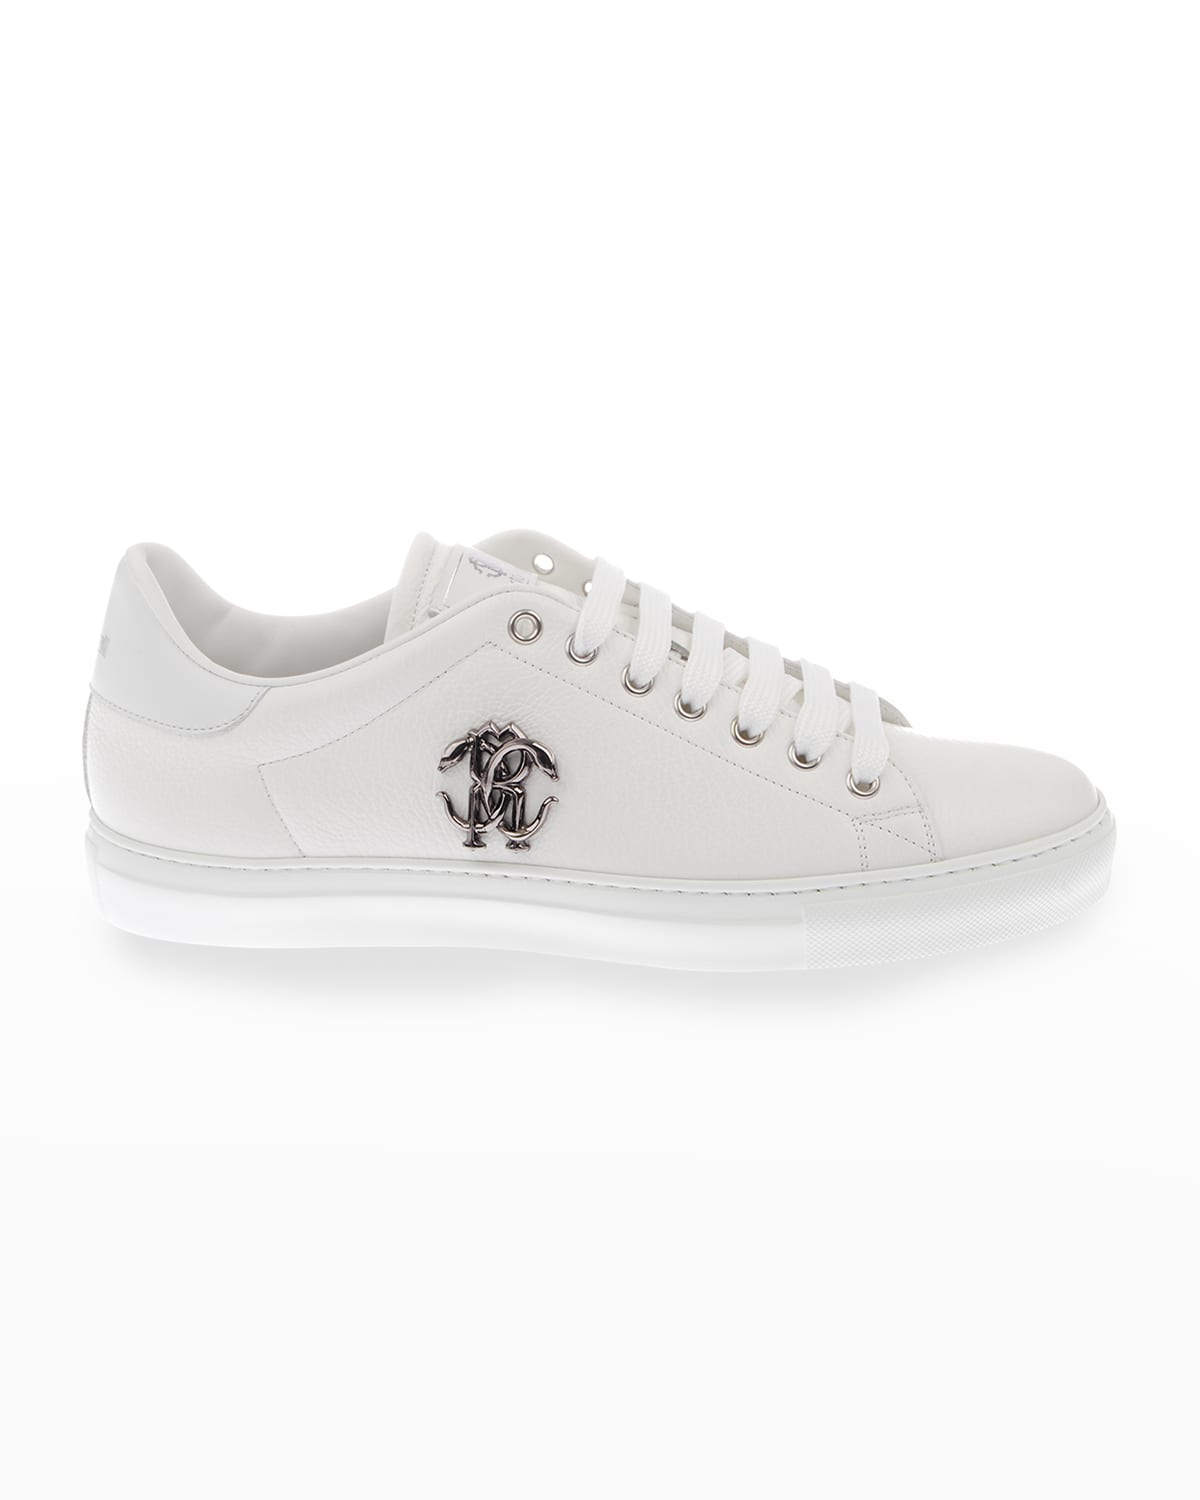 Men's Logo Leather Low-Top Sneakers, White